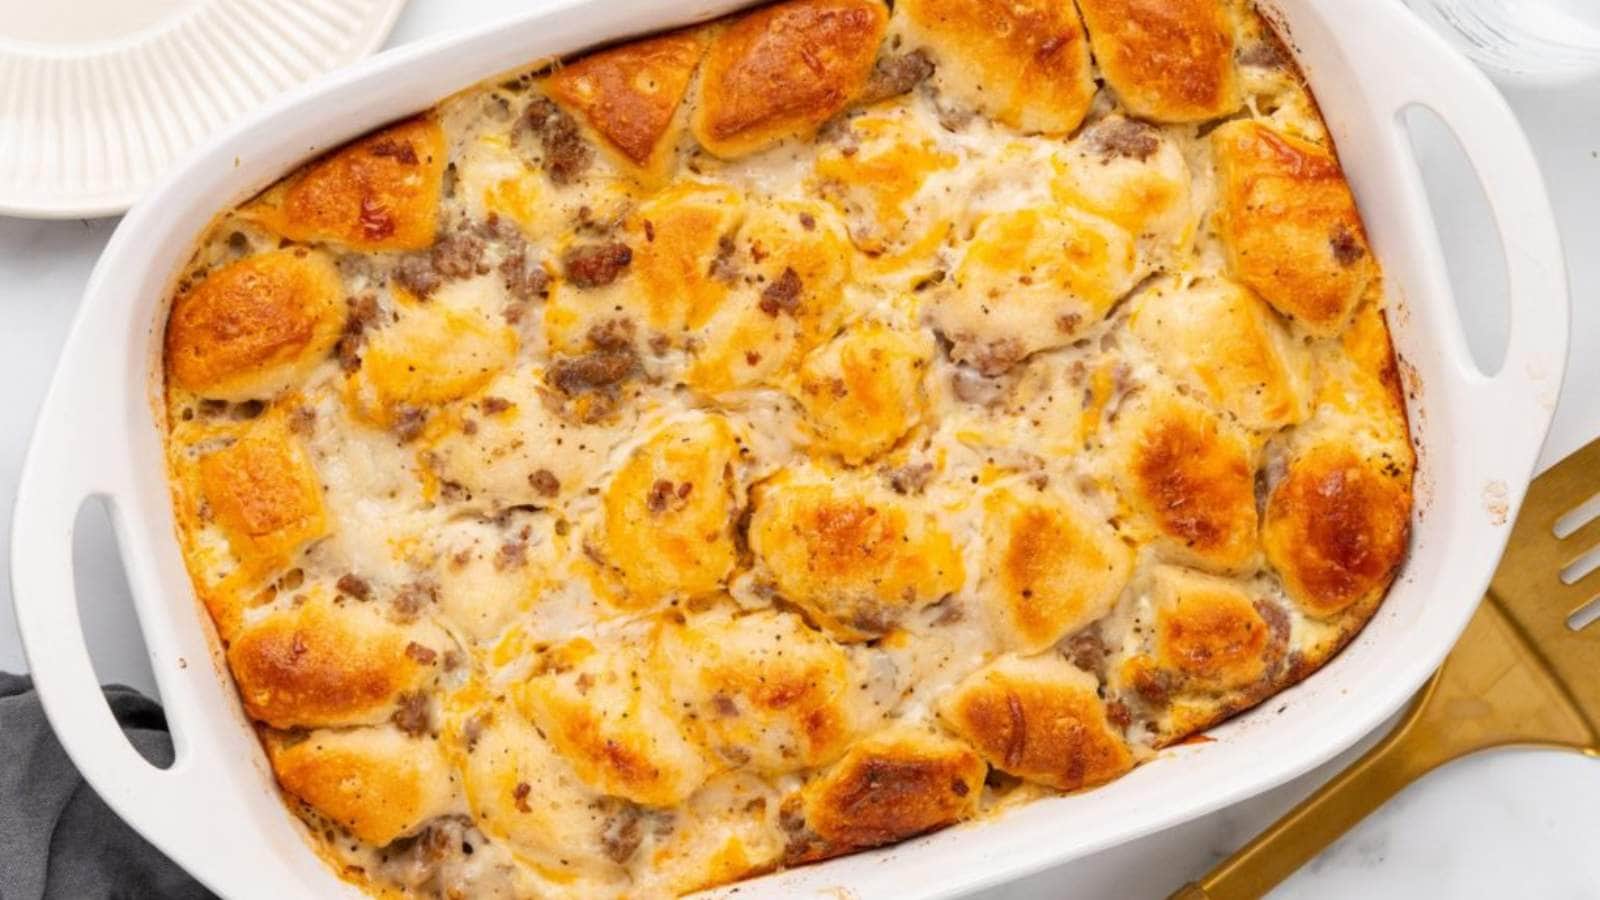 Biscuits and Gravy Casserole Recipe recipe by Mimosas And Motherhood.